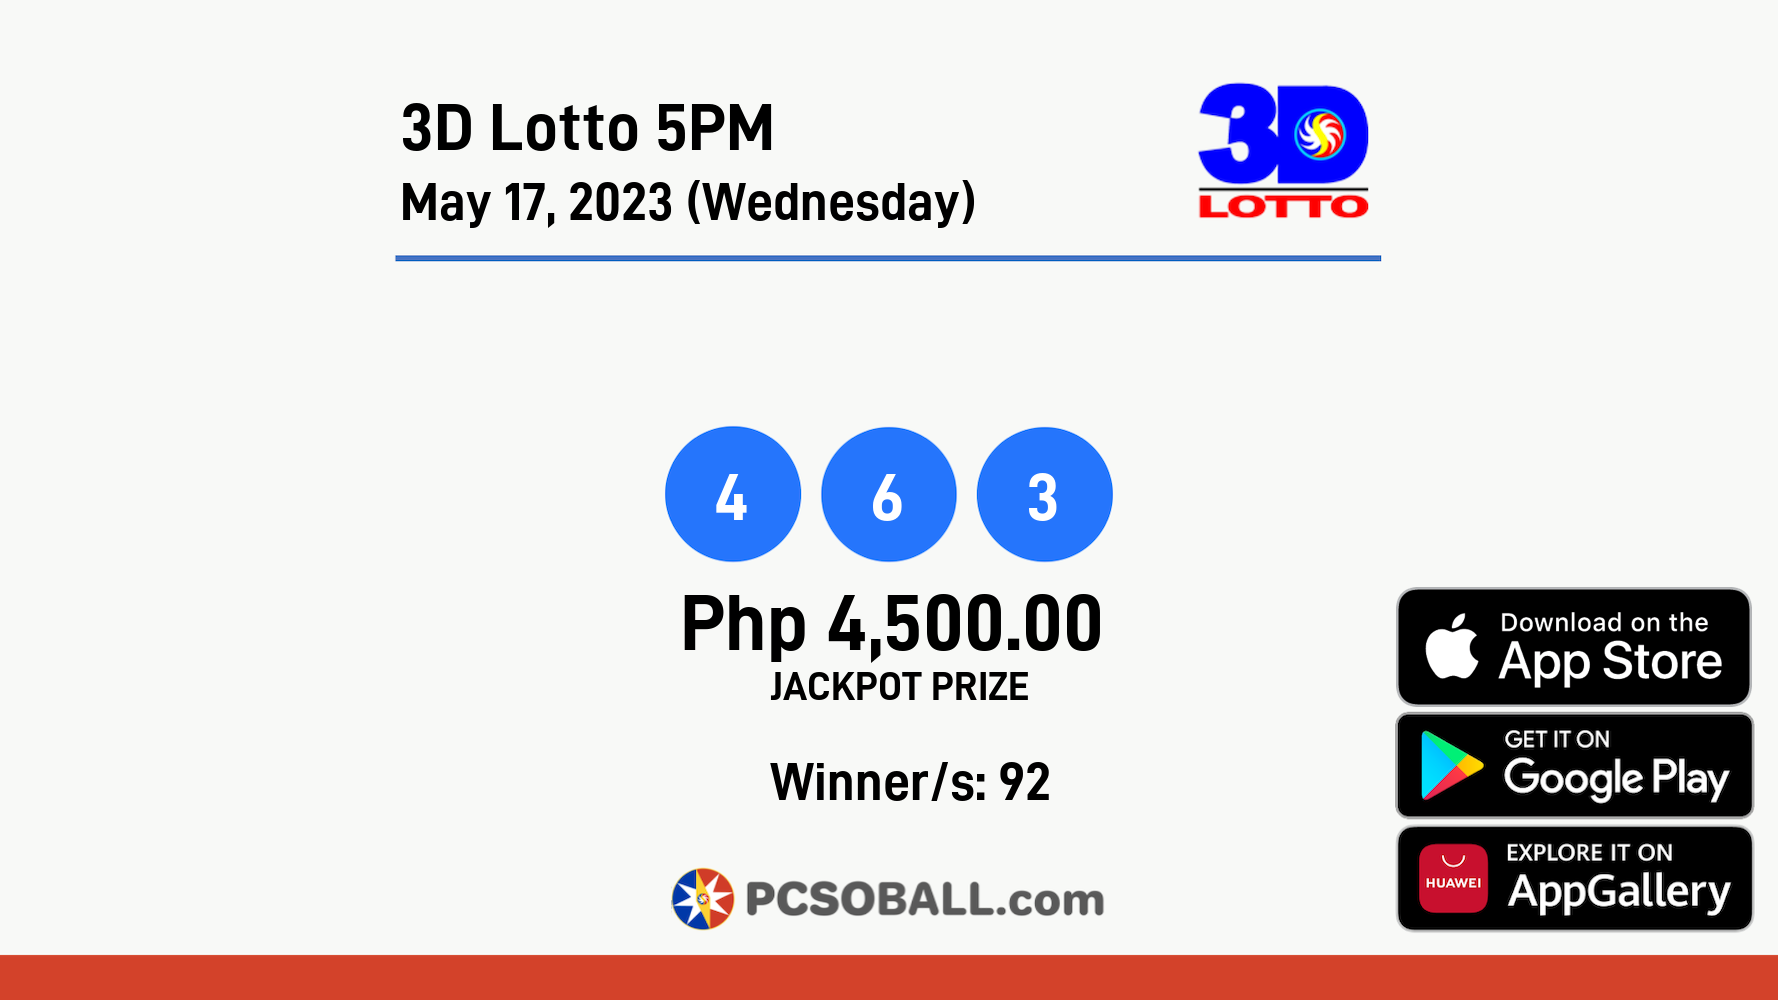 3D Lotto 5PM May 17, 2023 (Wednesday) Result